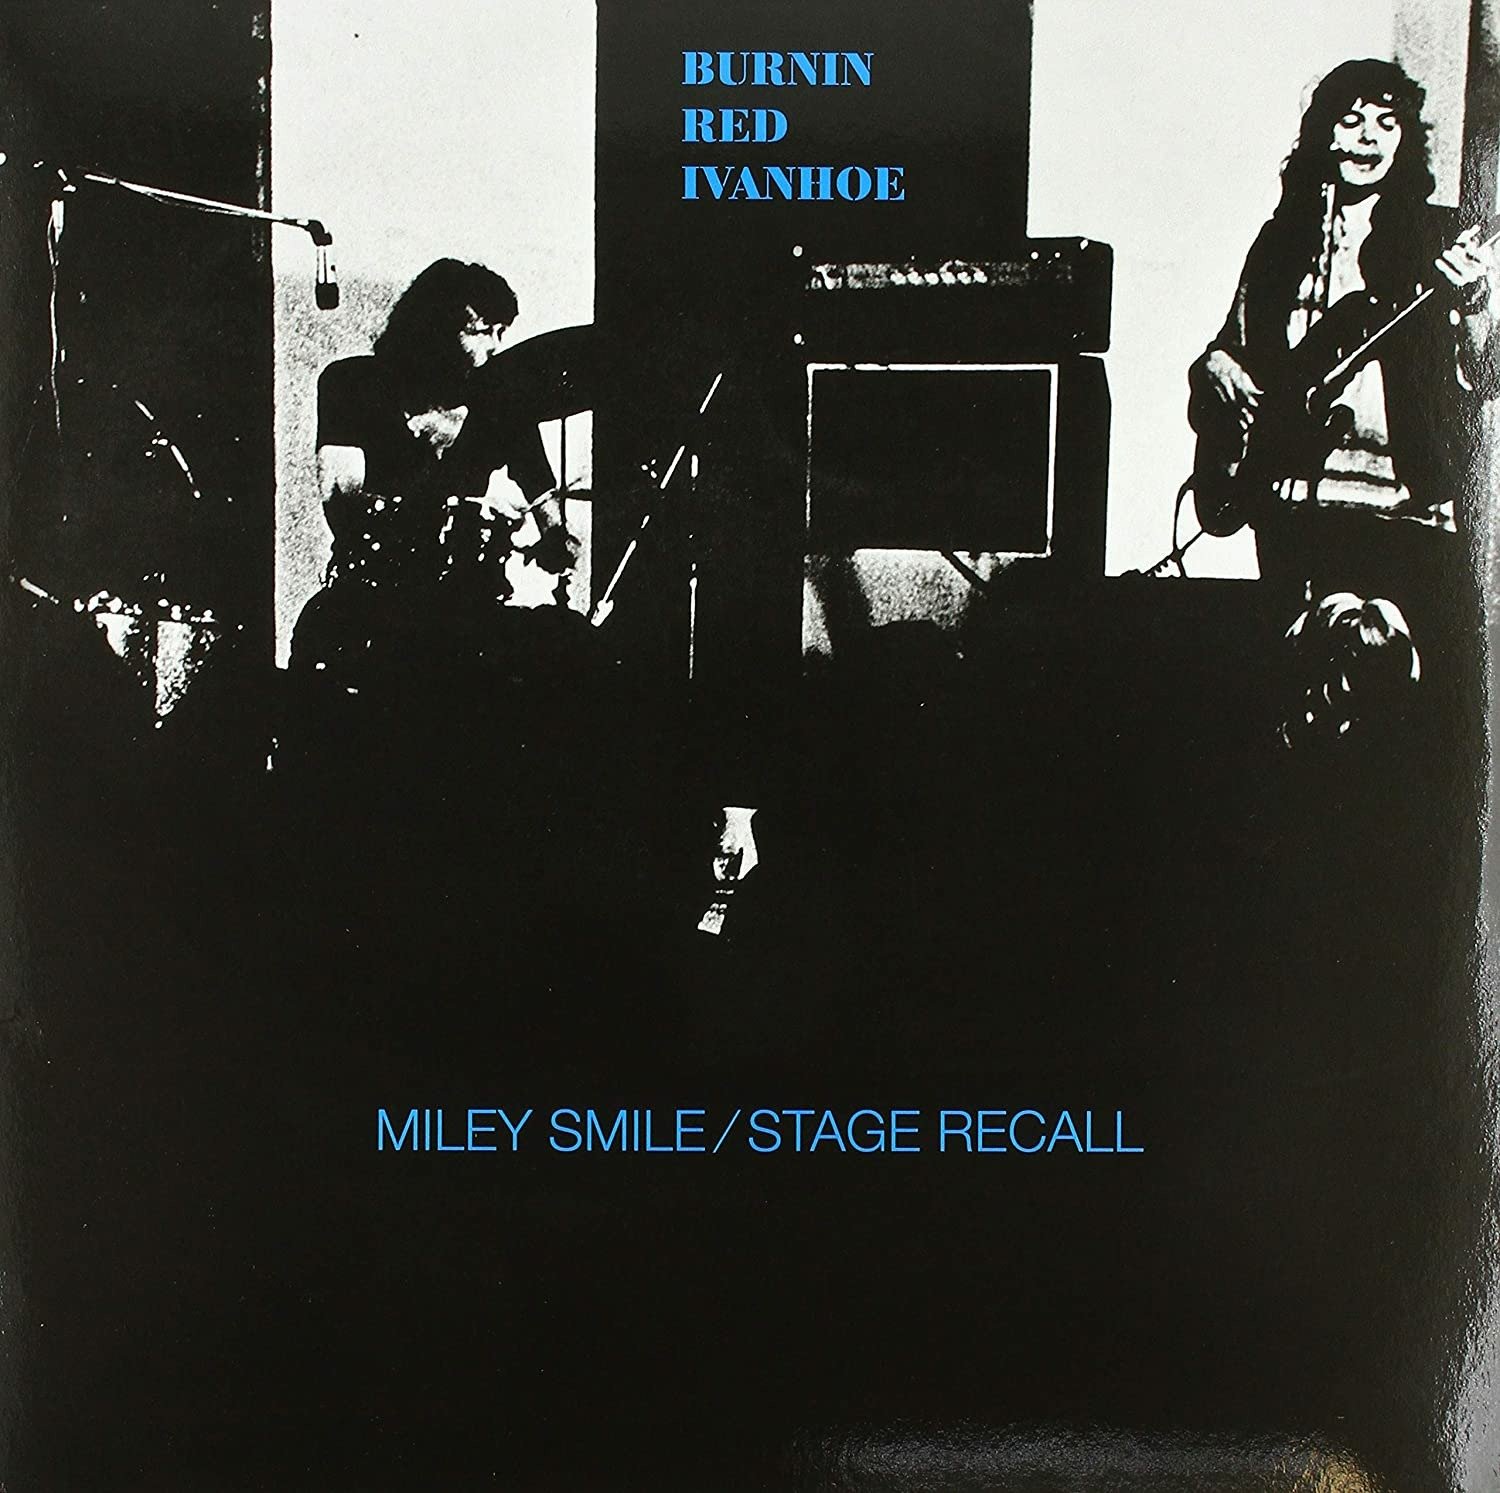 CD Shop - BURNIN RED IVANHOE MILEY SMILE/STAGE RECALL